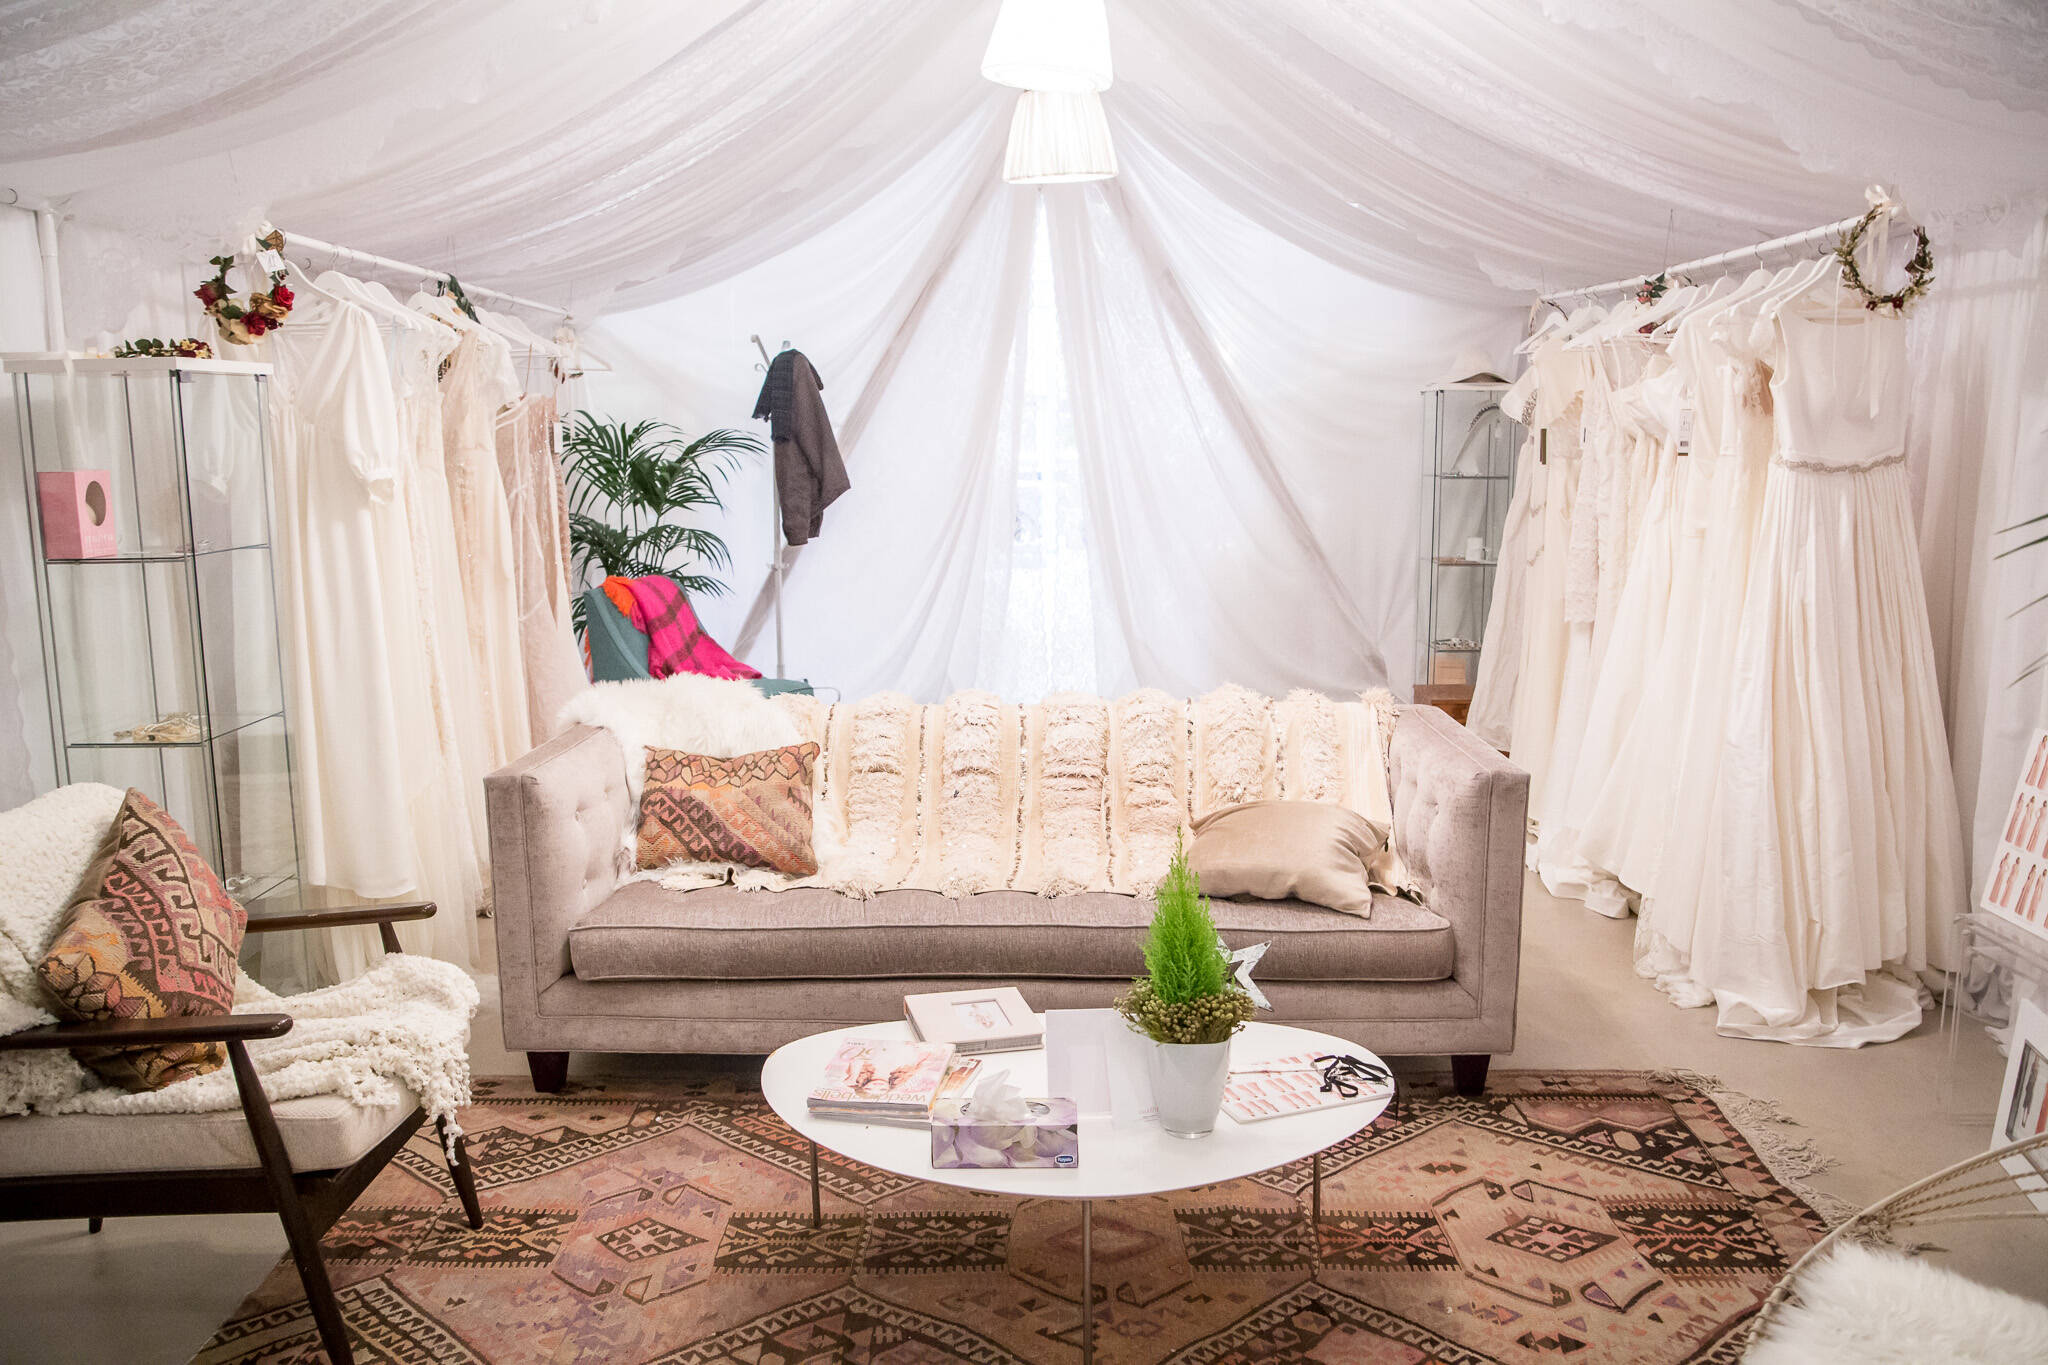 The Best Bridal Stores in Toronto